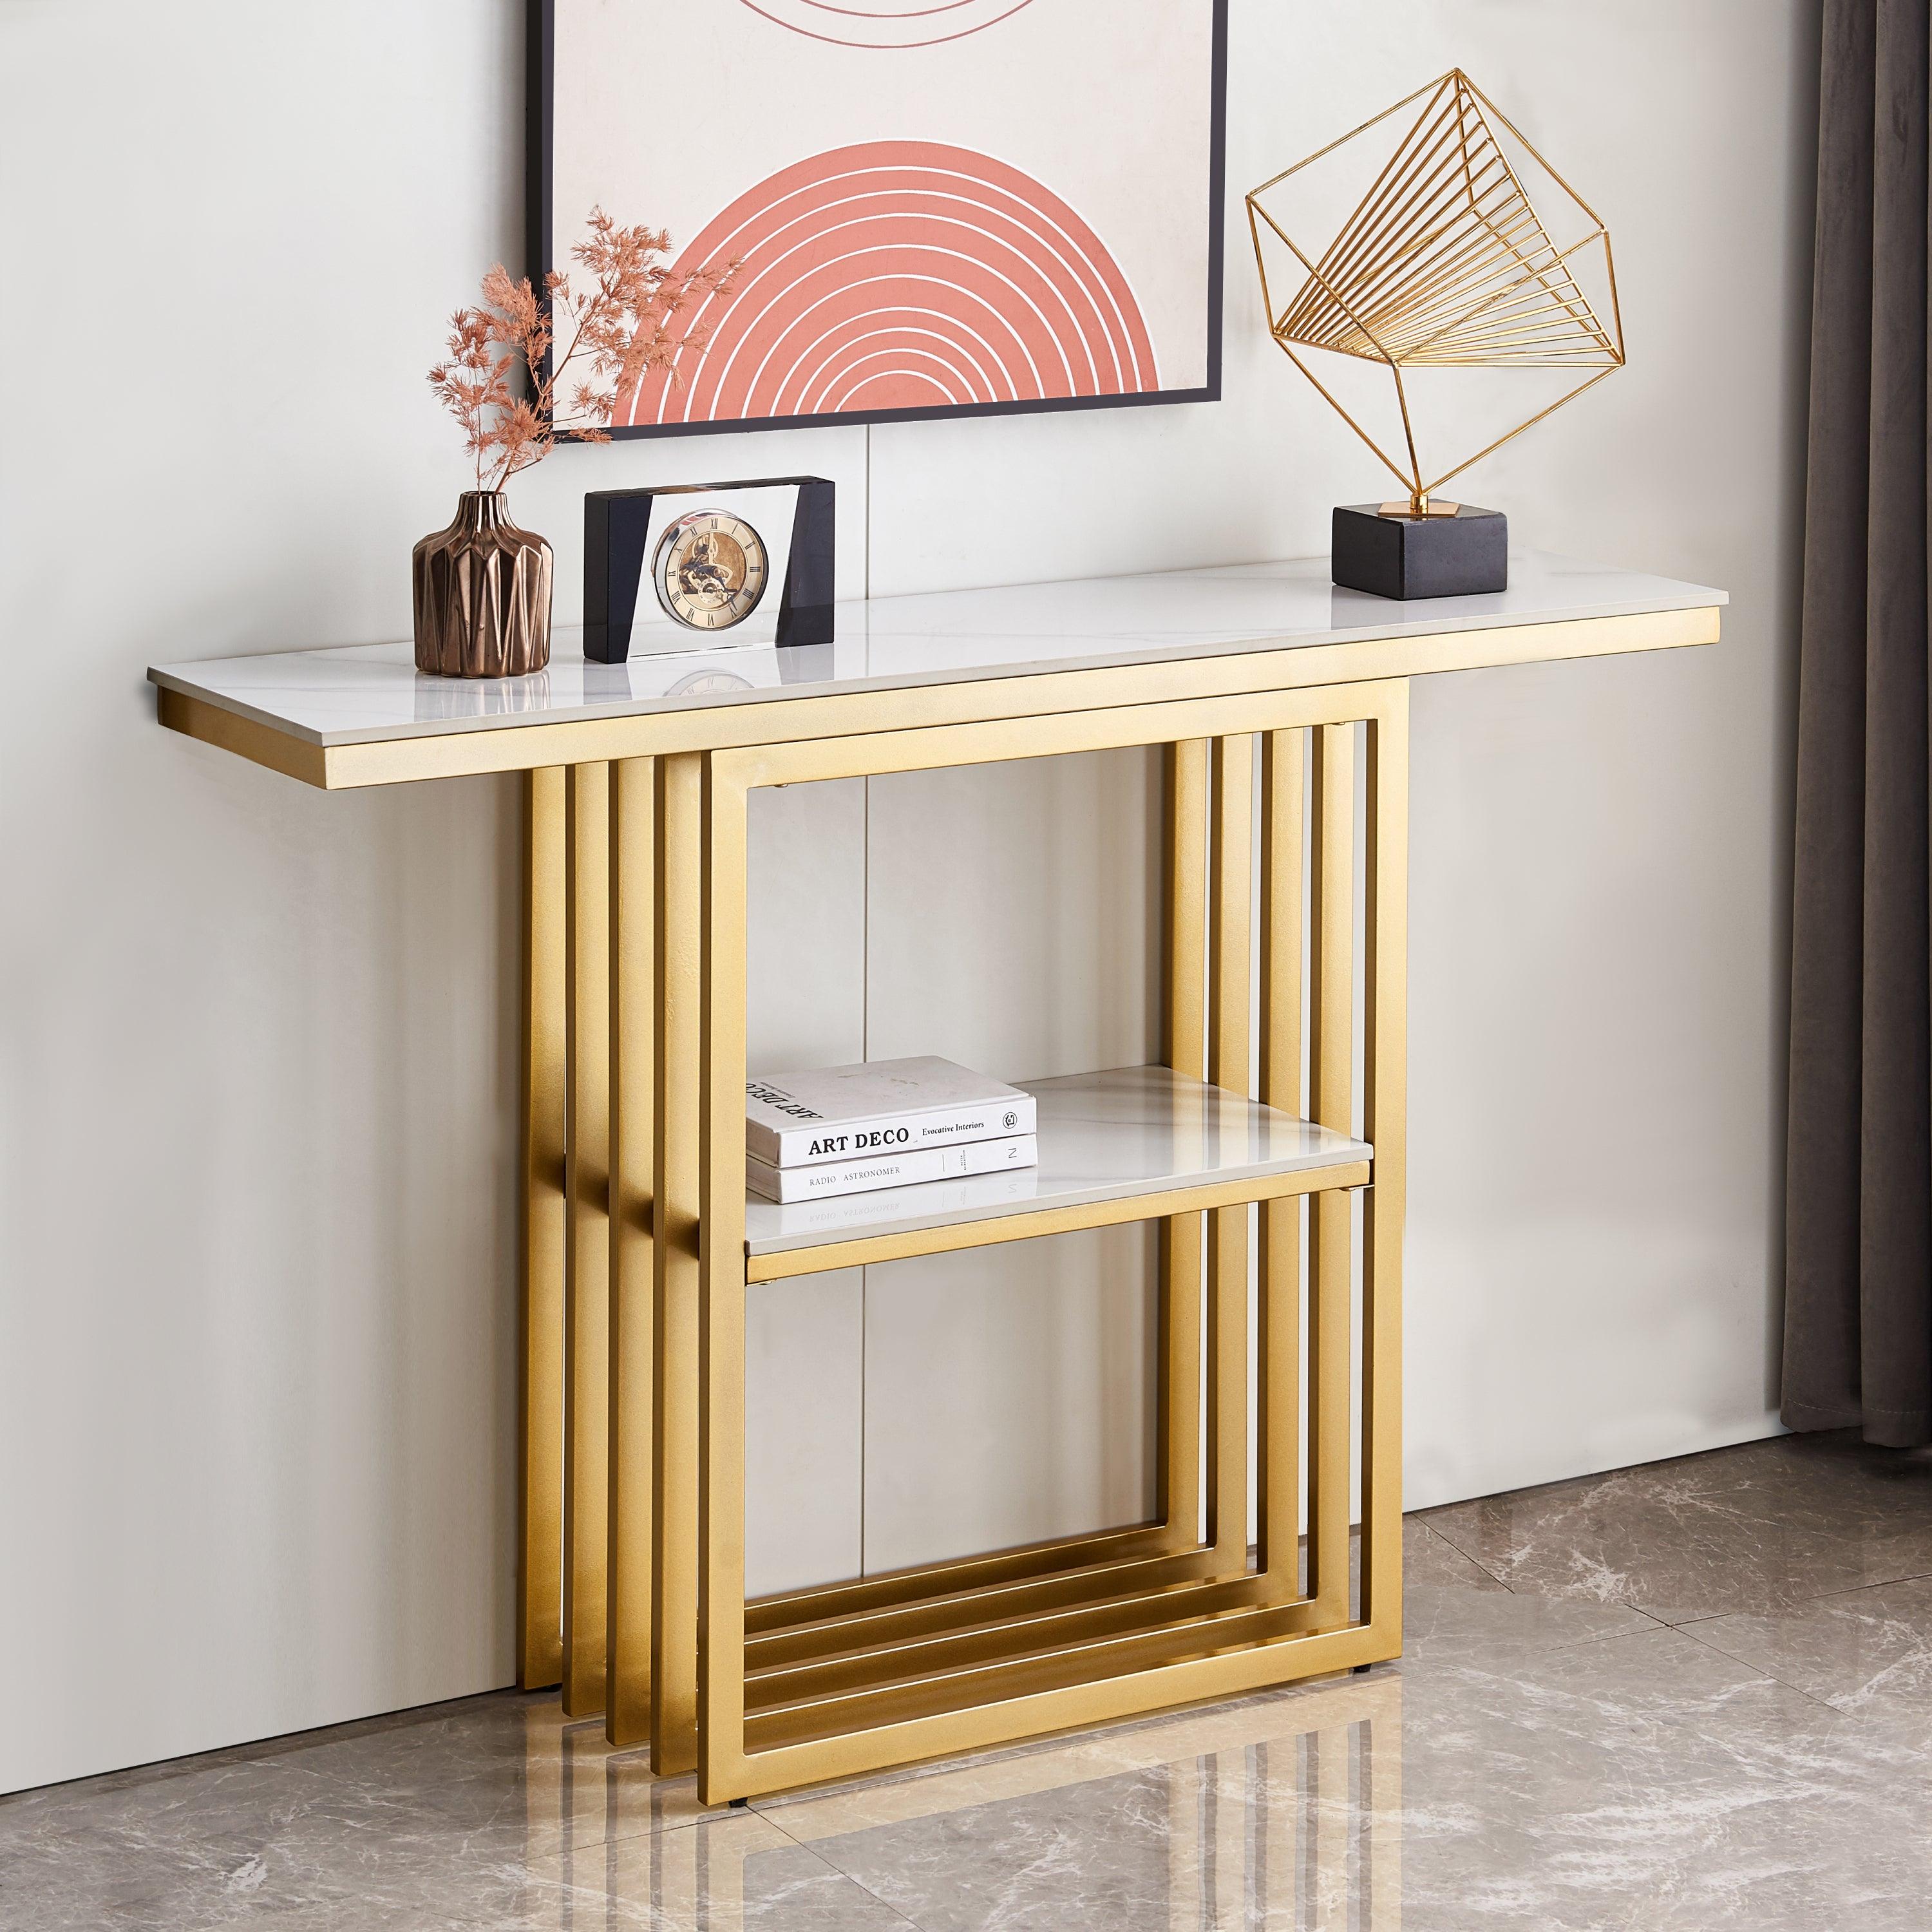 HENCHIL Modern Console Table, Metal Frame with Adjustable Foot Pads, Golden